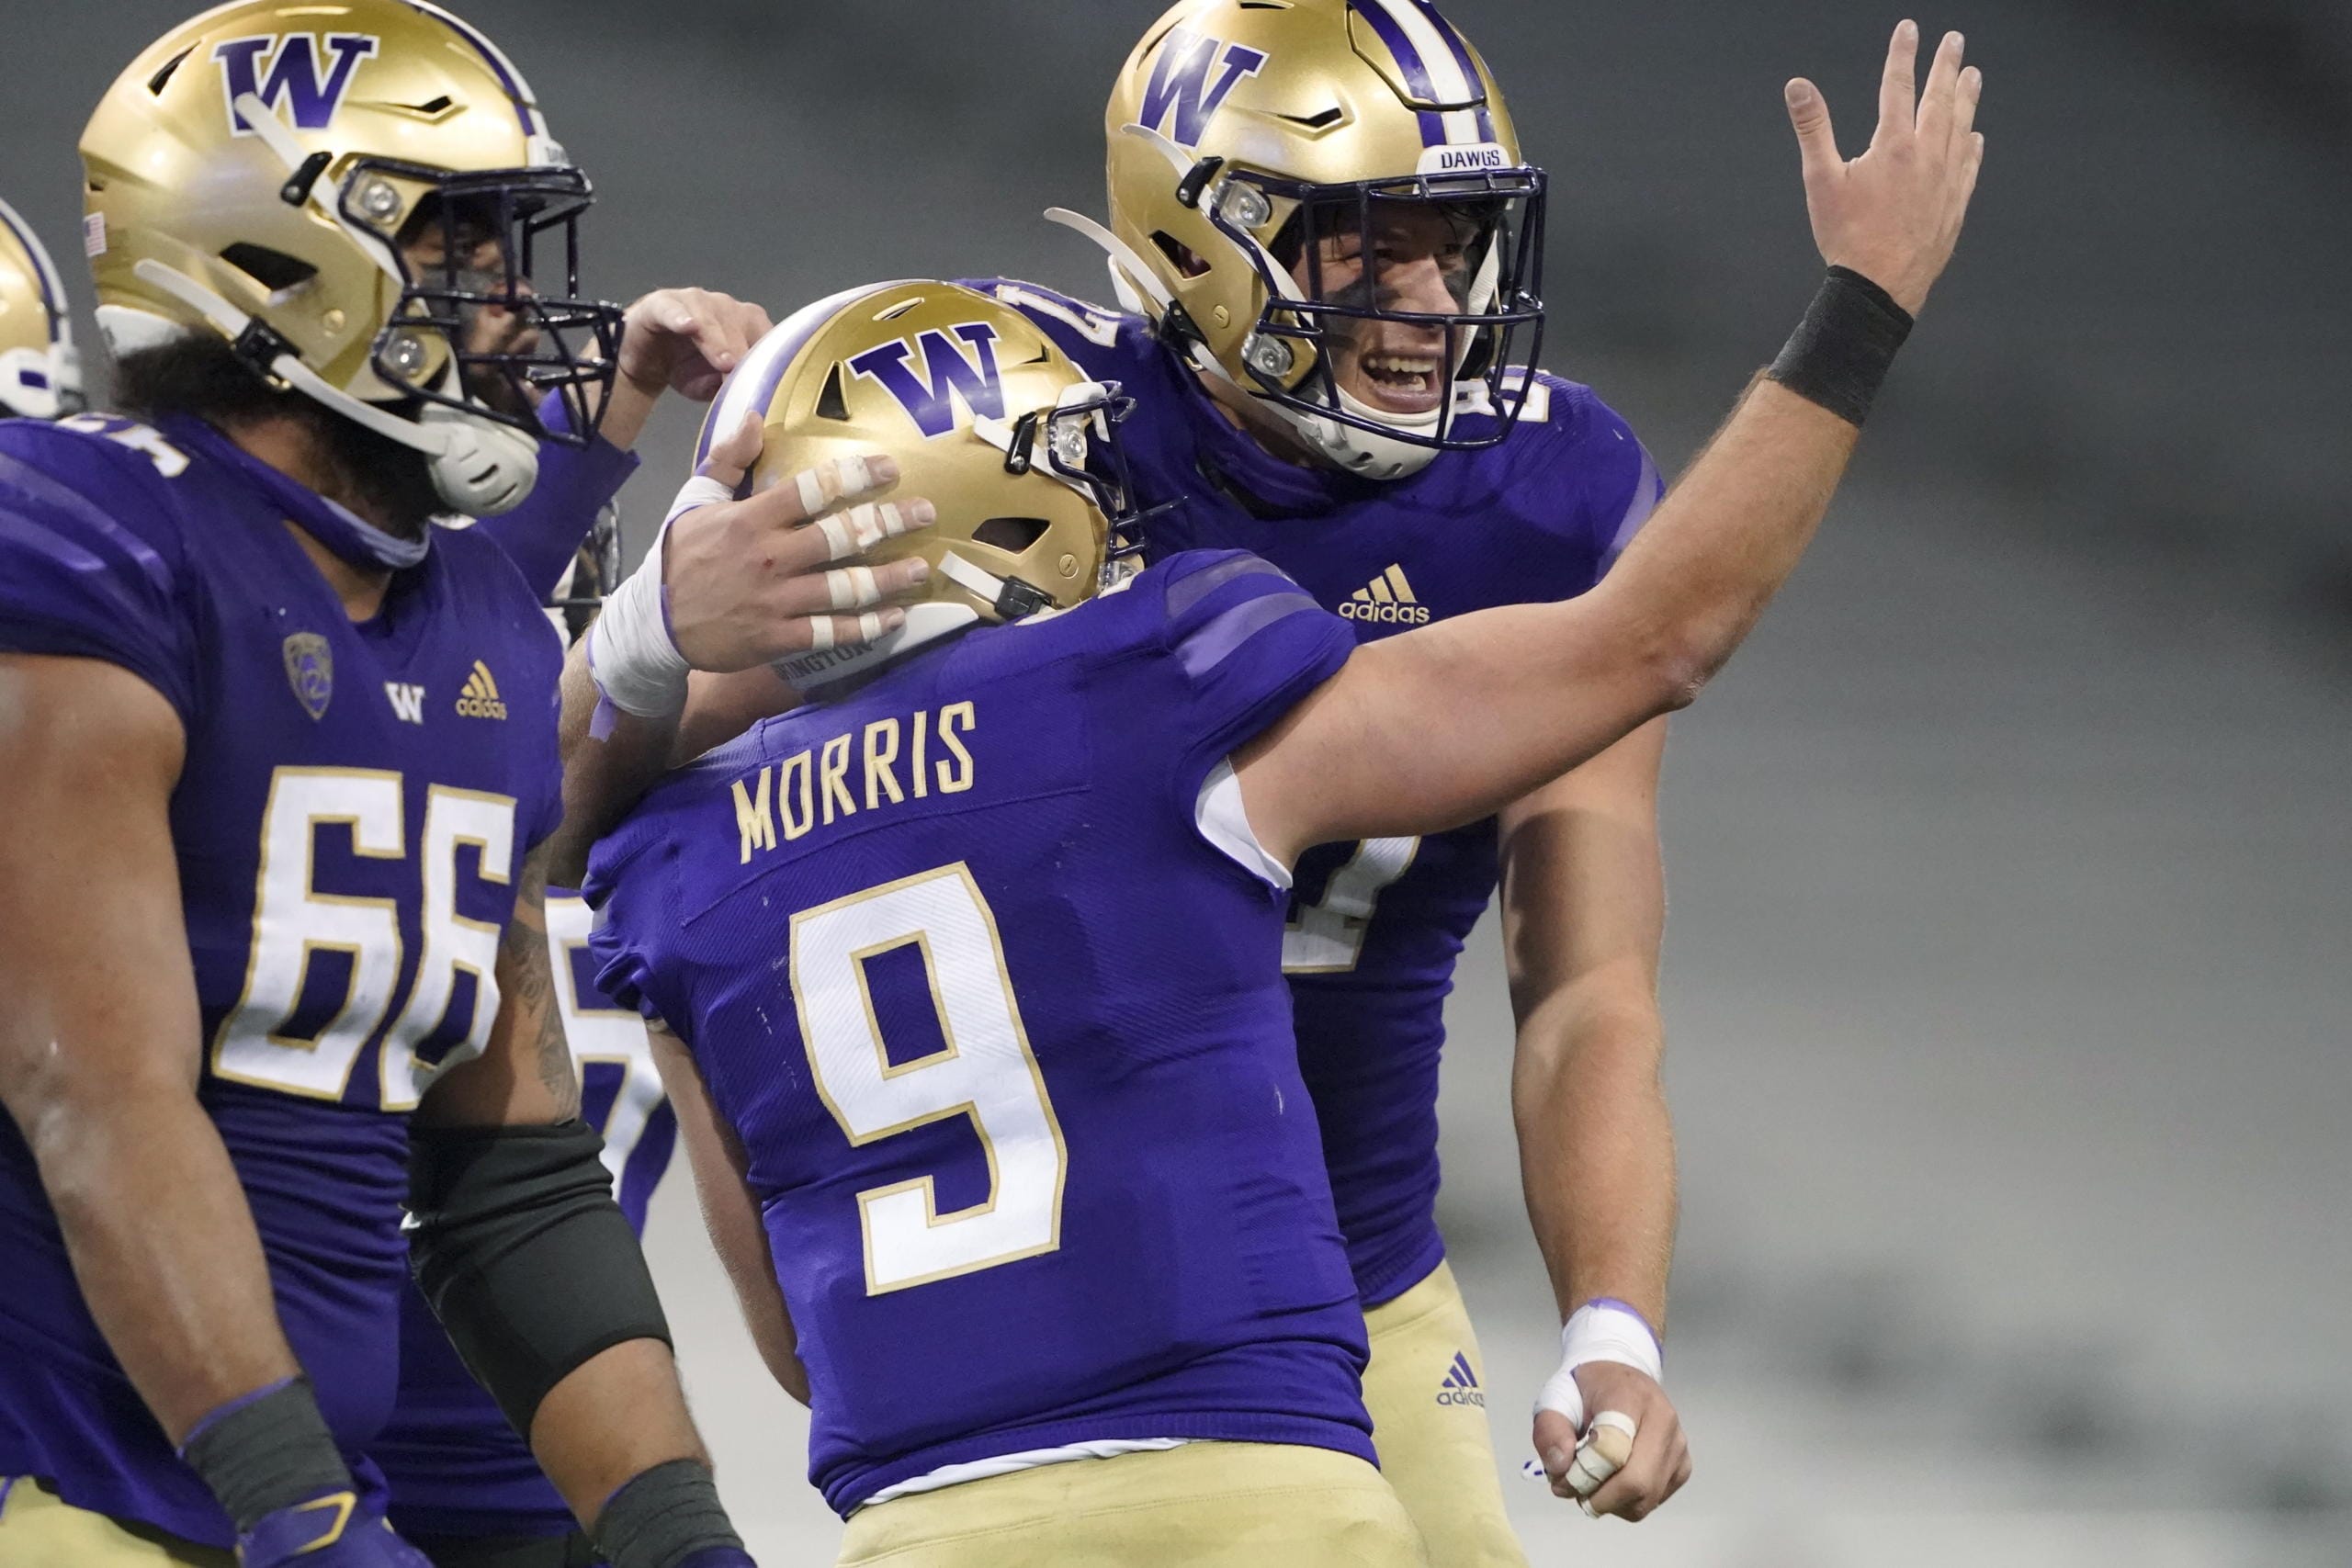 Washington quarterback Dylan Morris (9) celebrates with tight end Cade Otton, right, after Morris passed to Otton for a touchdown against Utah in the final minute of an NCAA college football game Saturday, Nov. 28, 2020, in Seattle. Washington won 24-21. (AP Photo/Ted S.